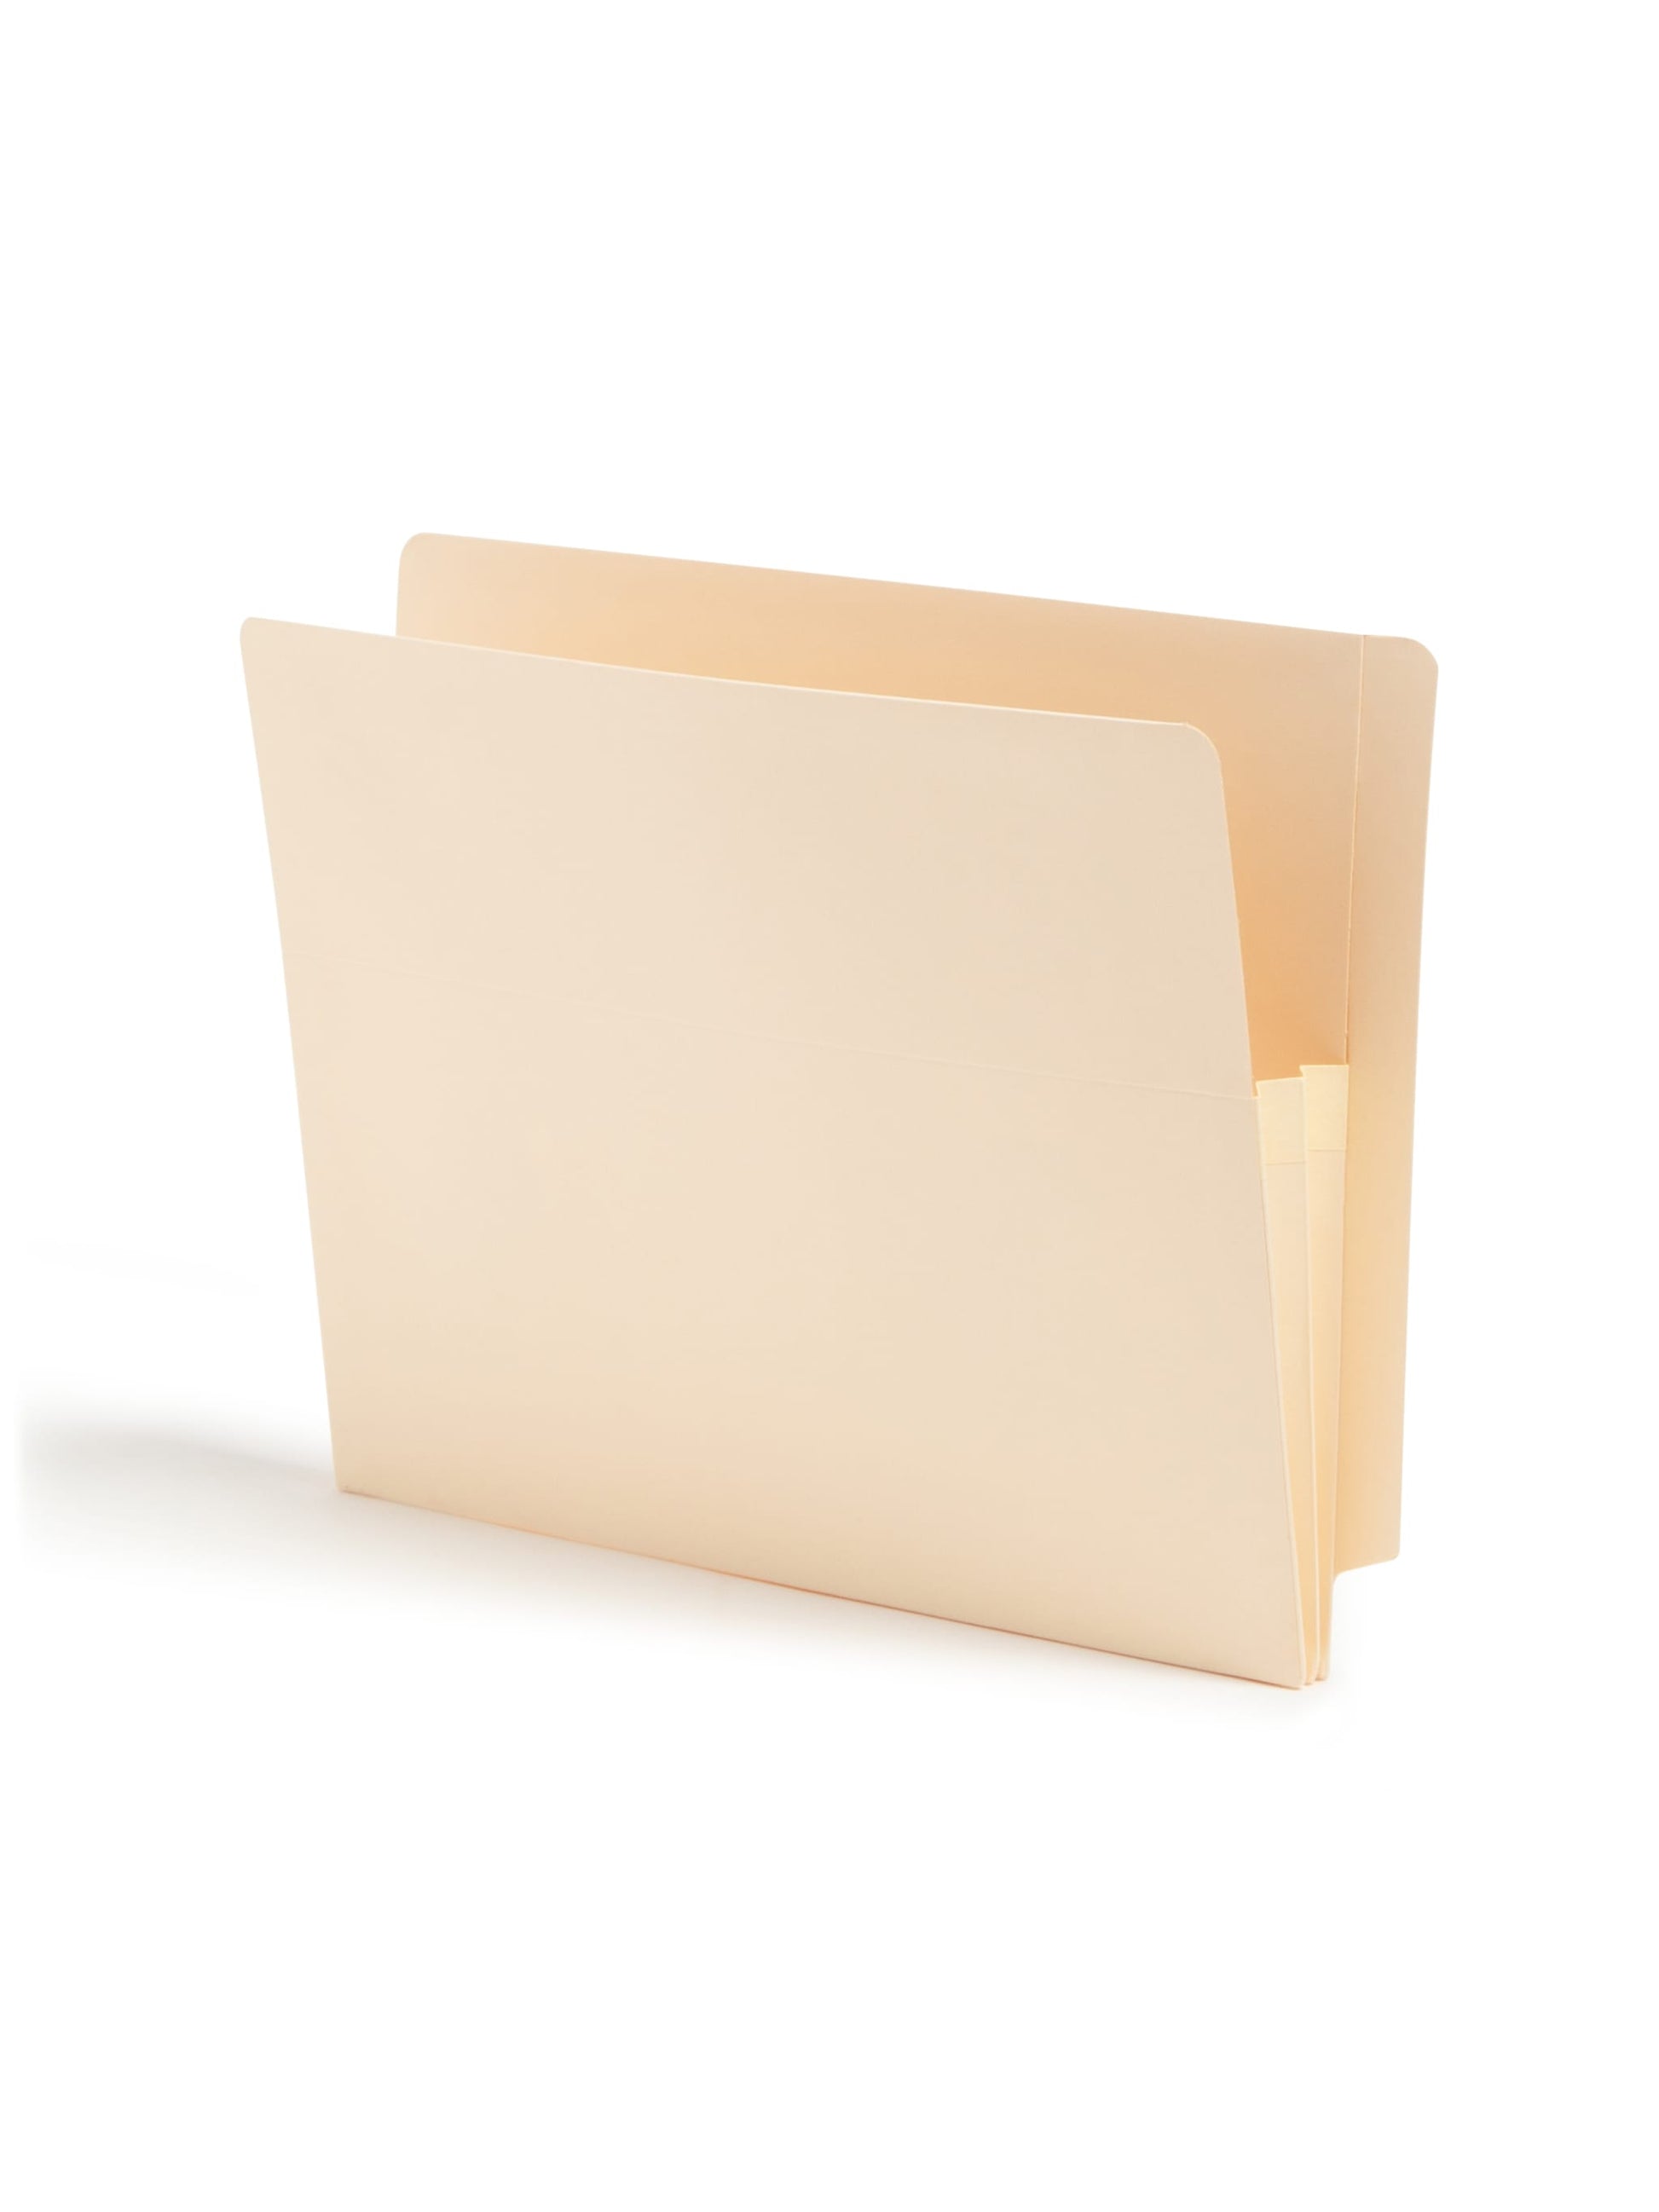 Reinforced End Tab File Pockets, Straight-Cut Tab, 1-3/4 inch Expansion, Manila Color, Letter Size, Set of 0, 30086486751149